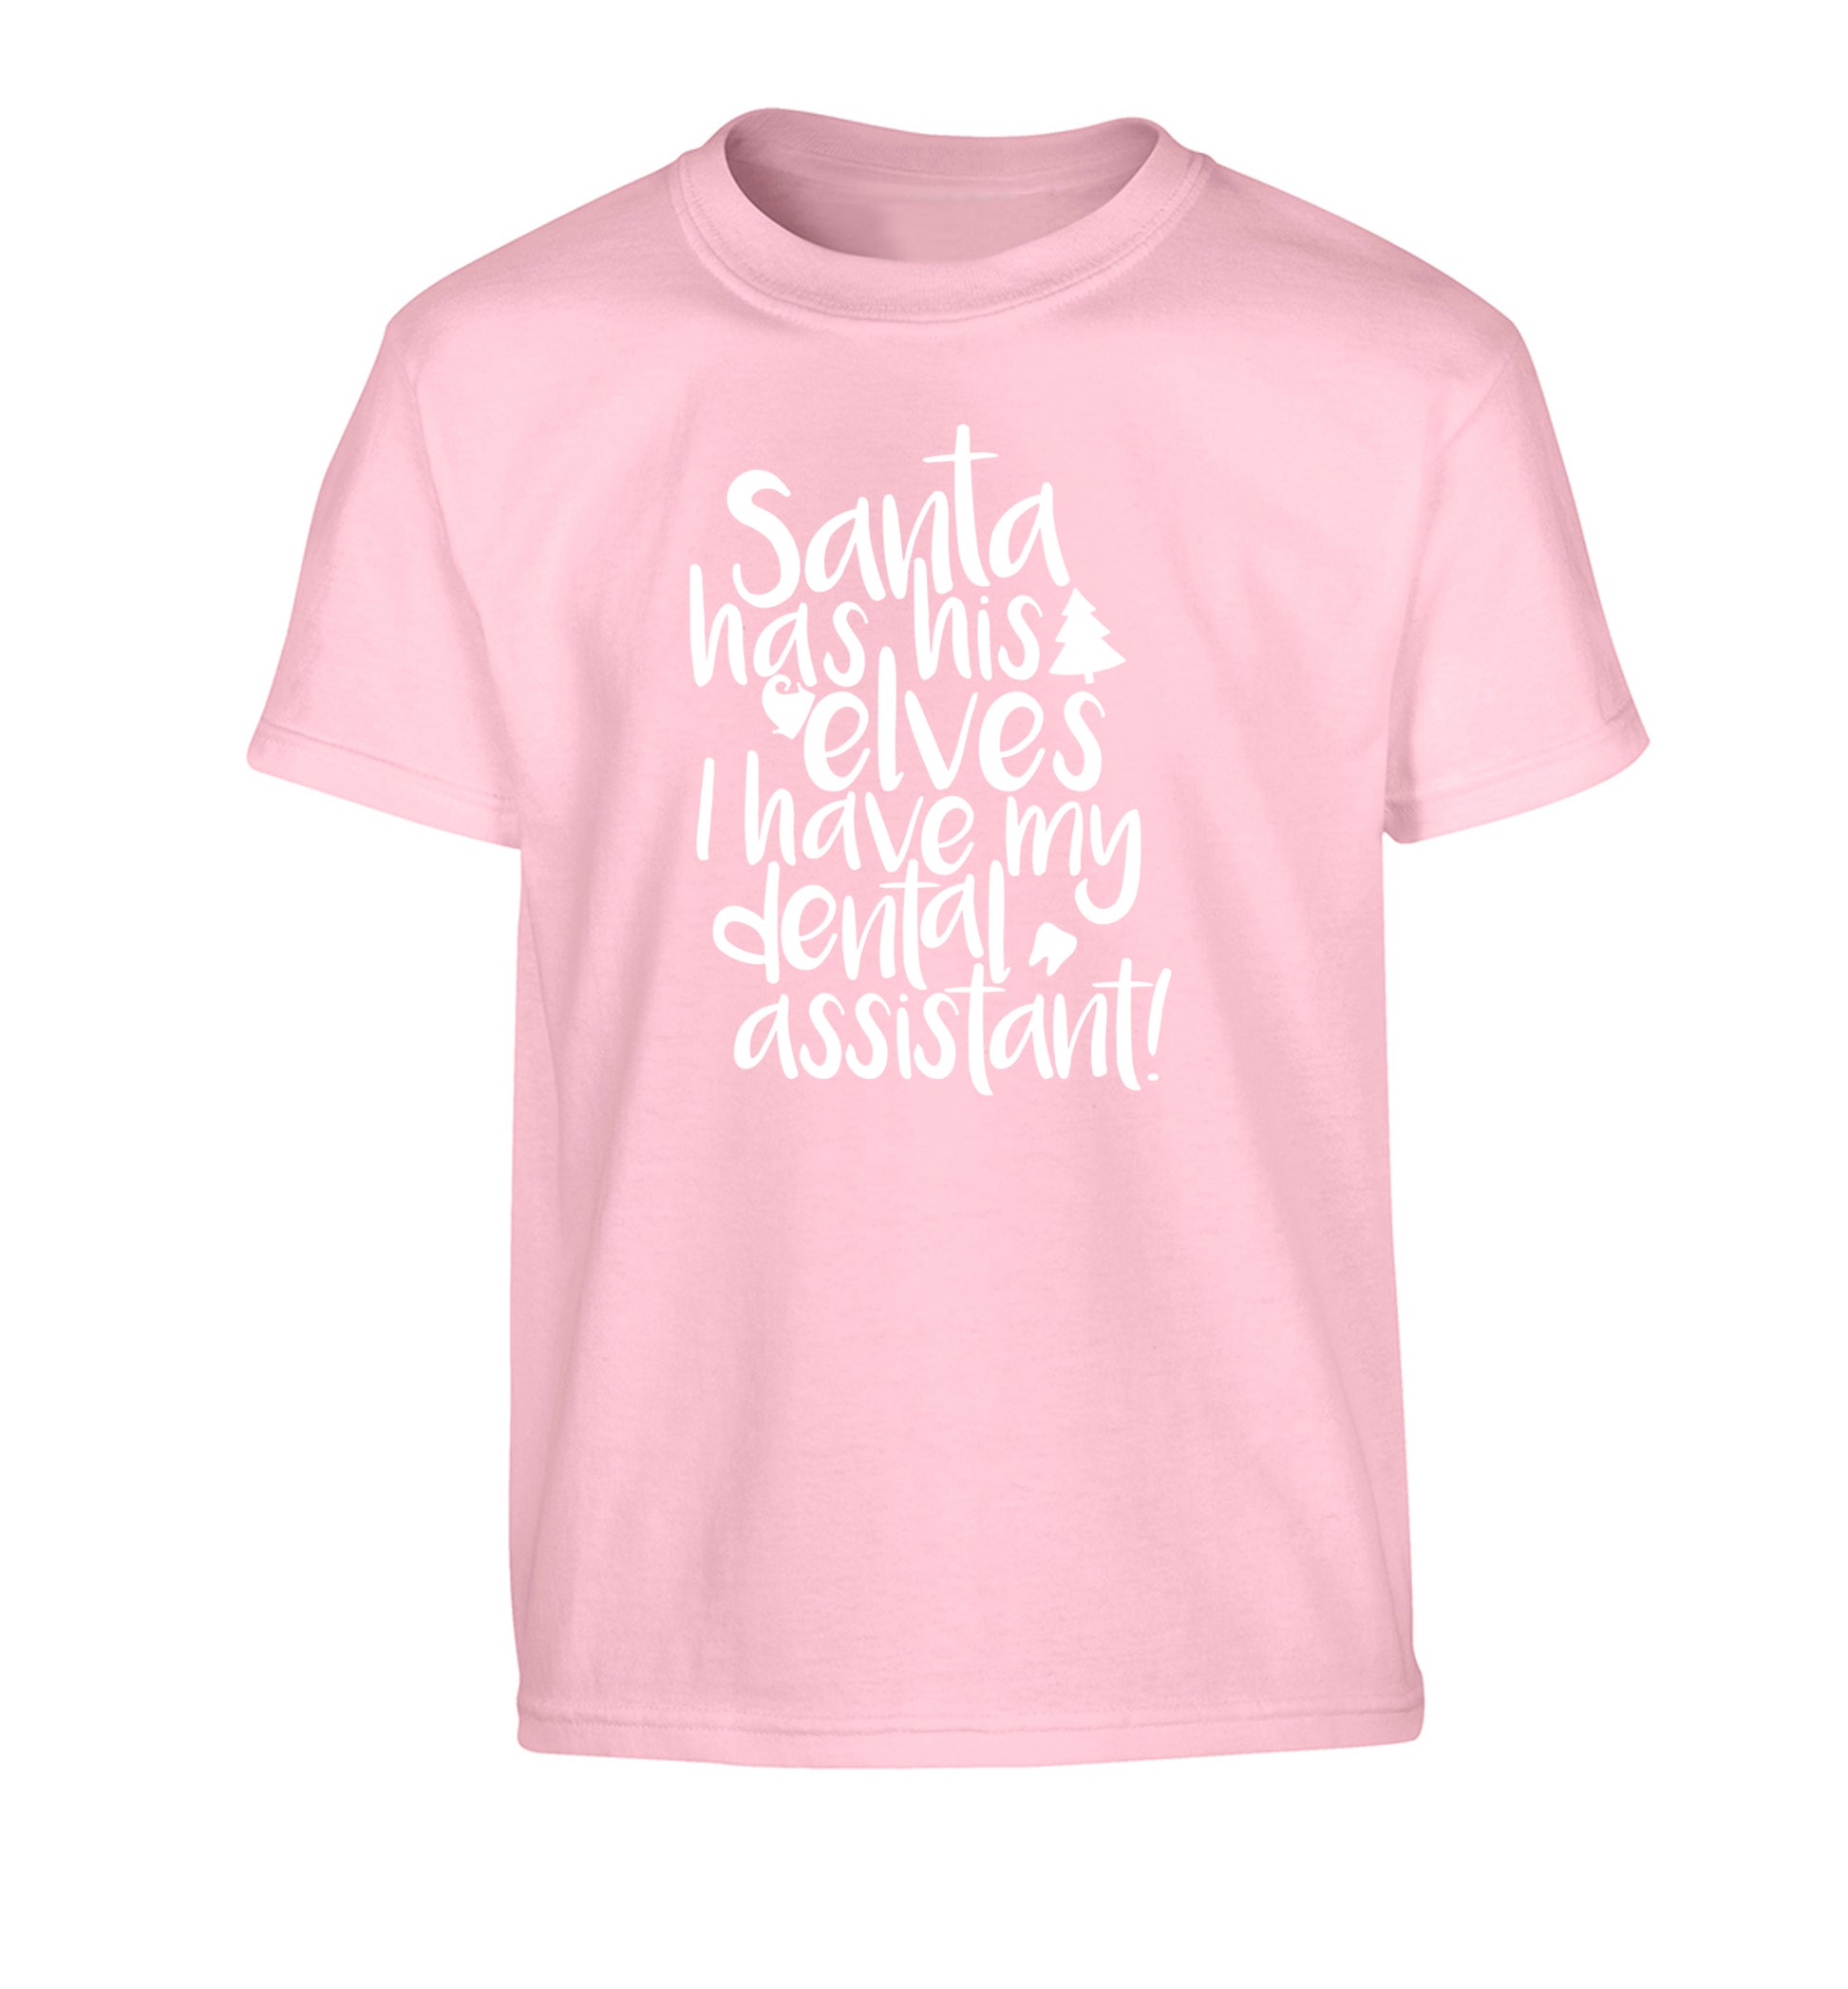 Santa has his elves I have my dental assistant Children's light pink Tshirt 12-14 Years